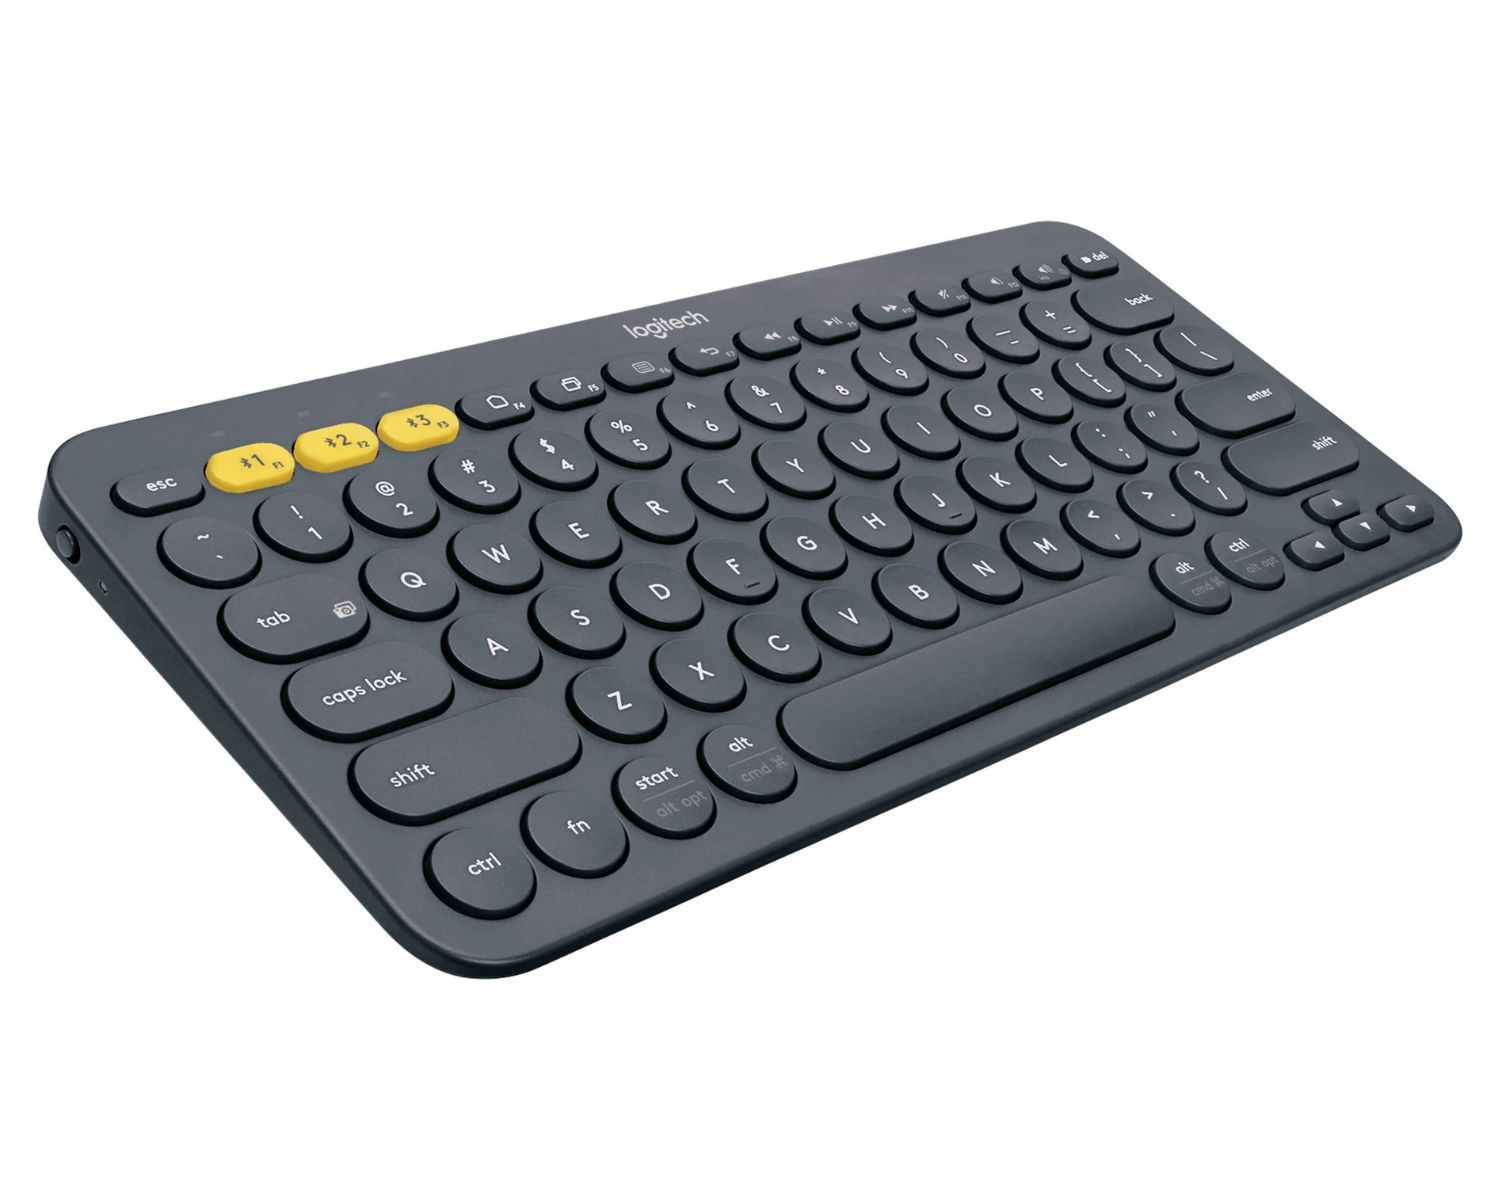 Top Bluetooth Keyboard for Him: A Comprehensive Review